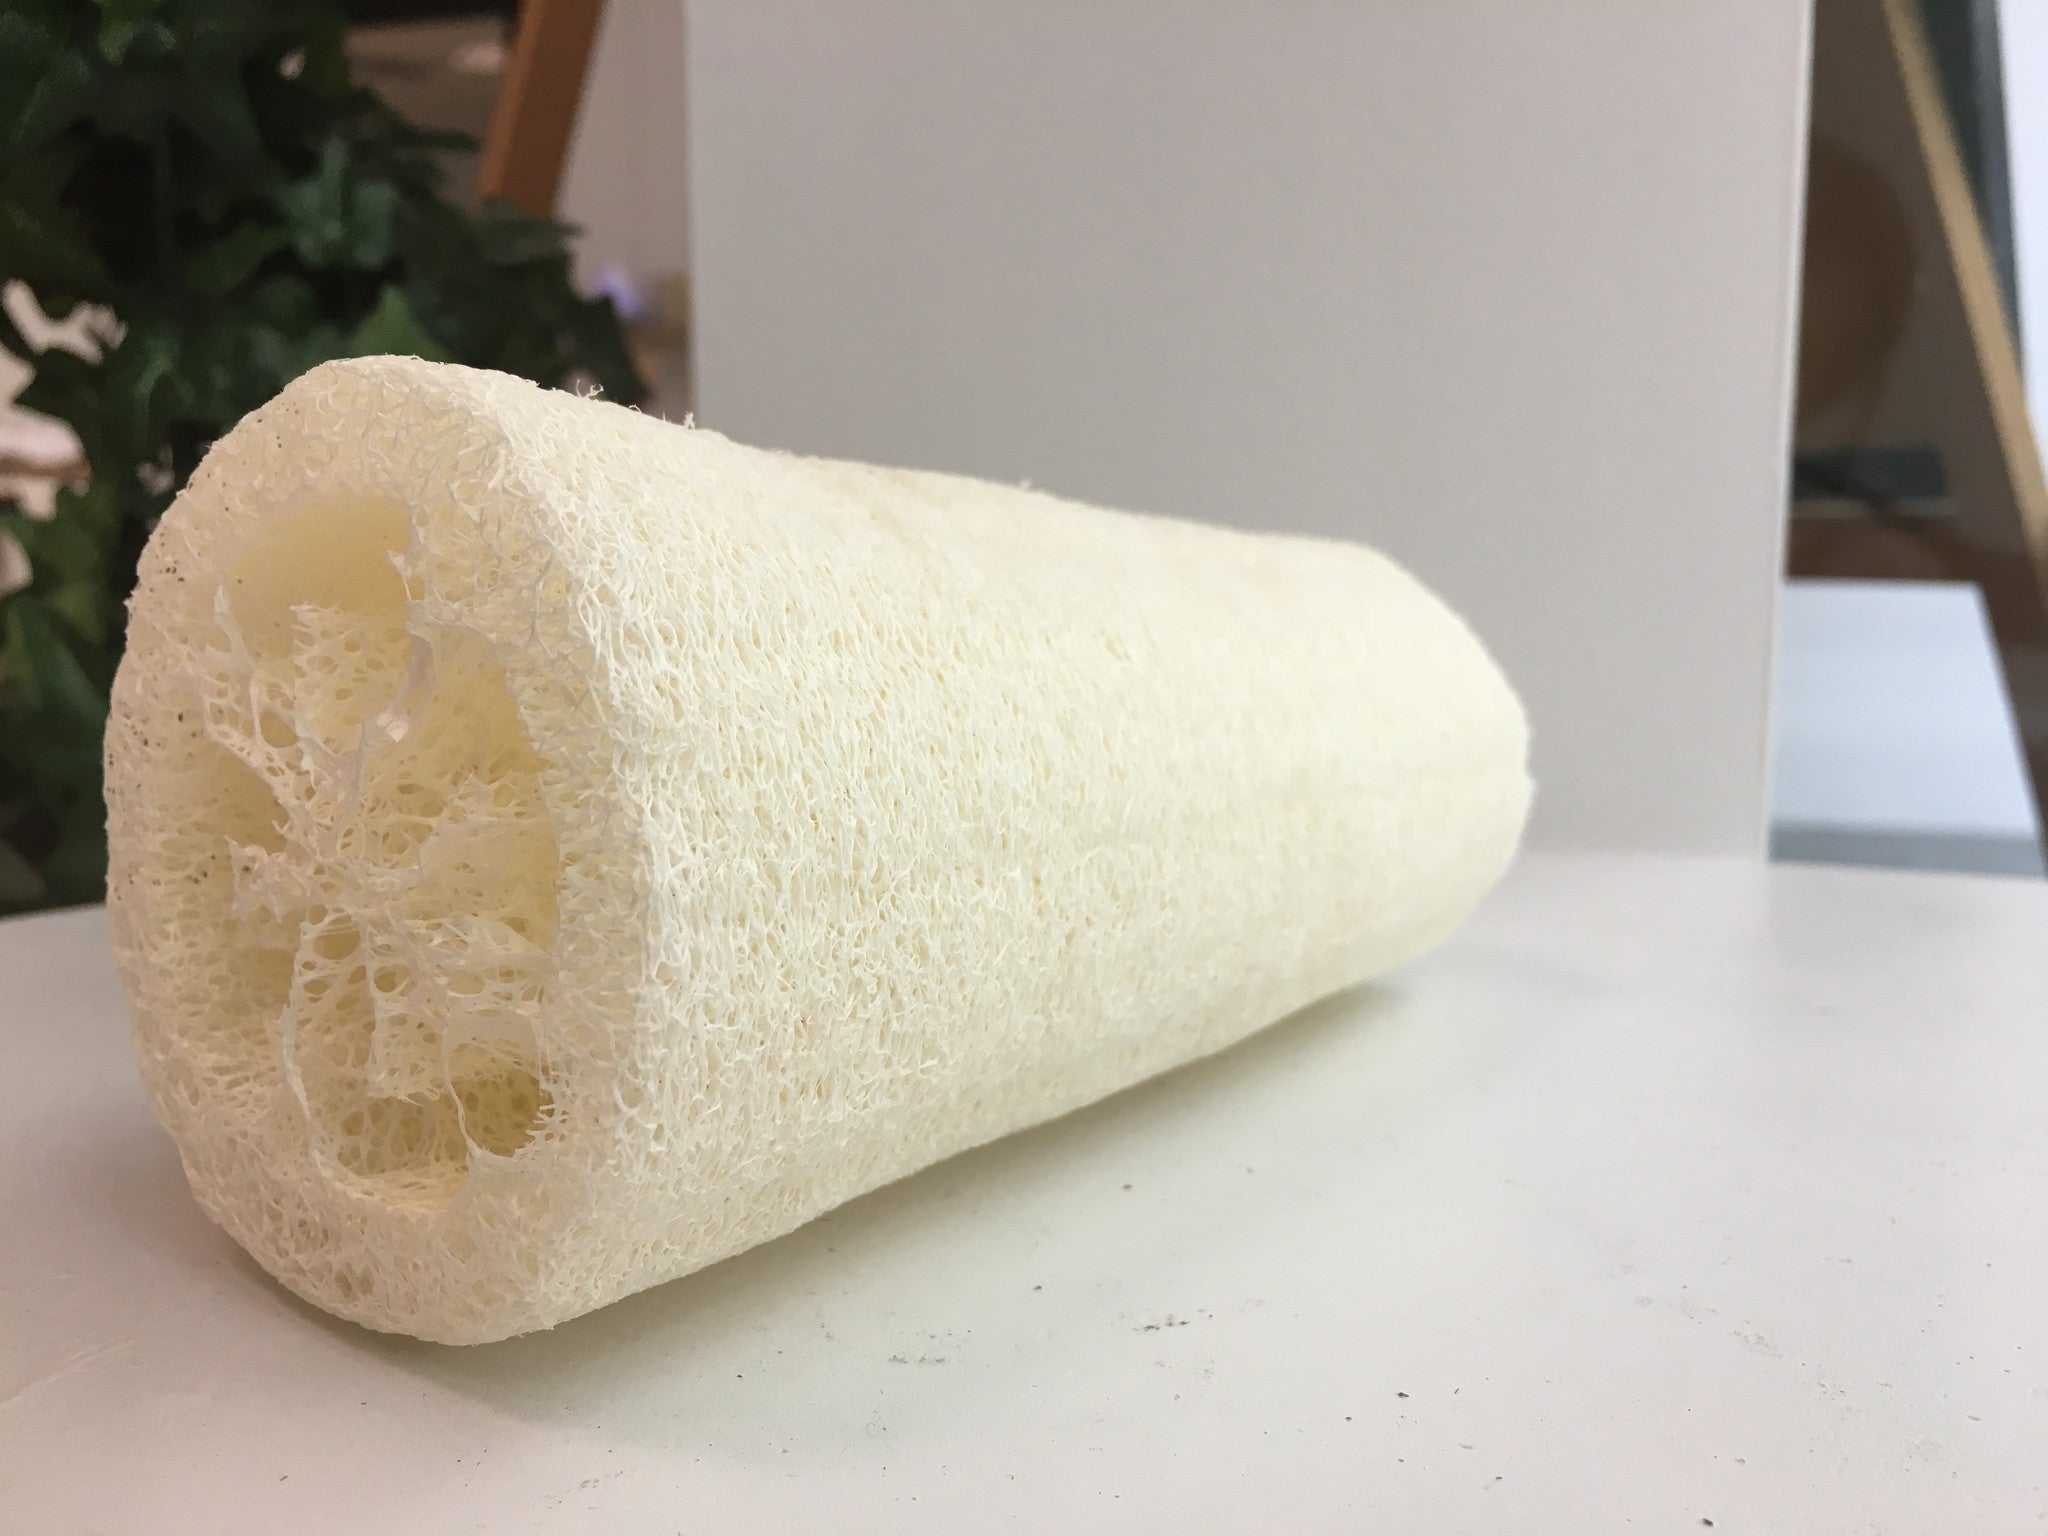 The Loofah - Handmade with Natural Ingredients. Hidden Forest Naturals